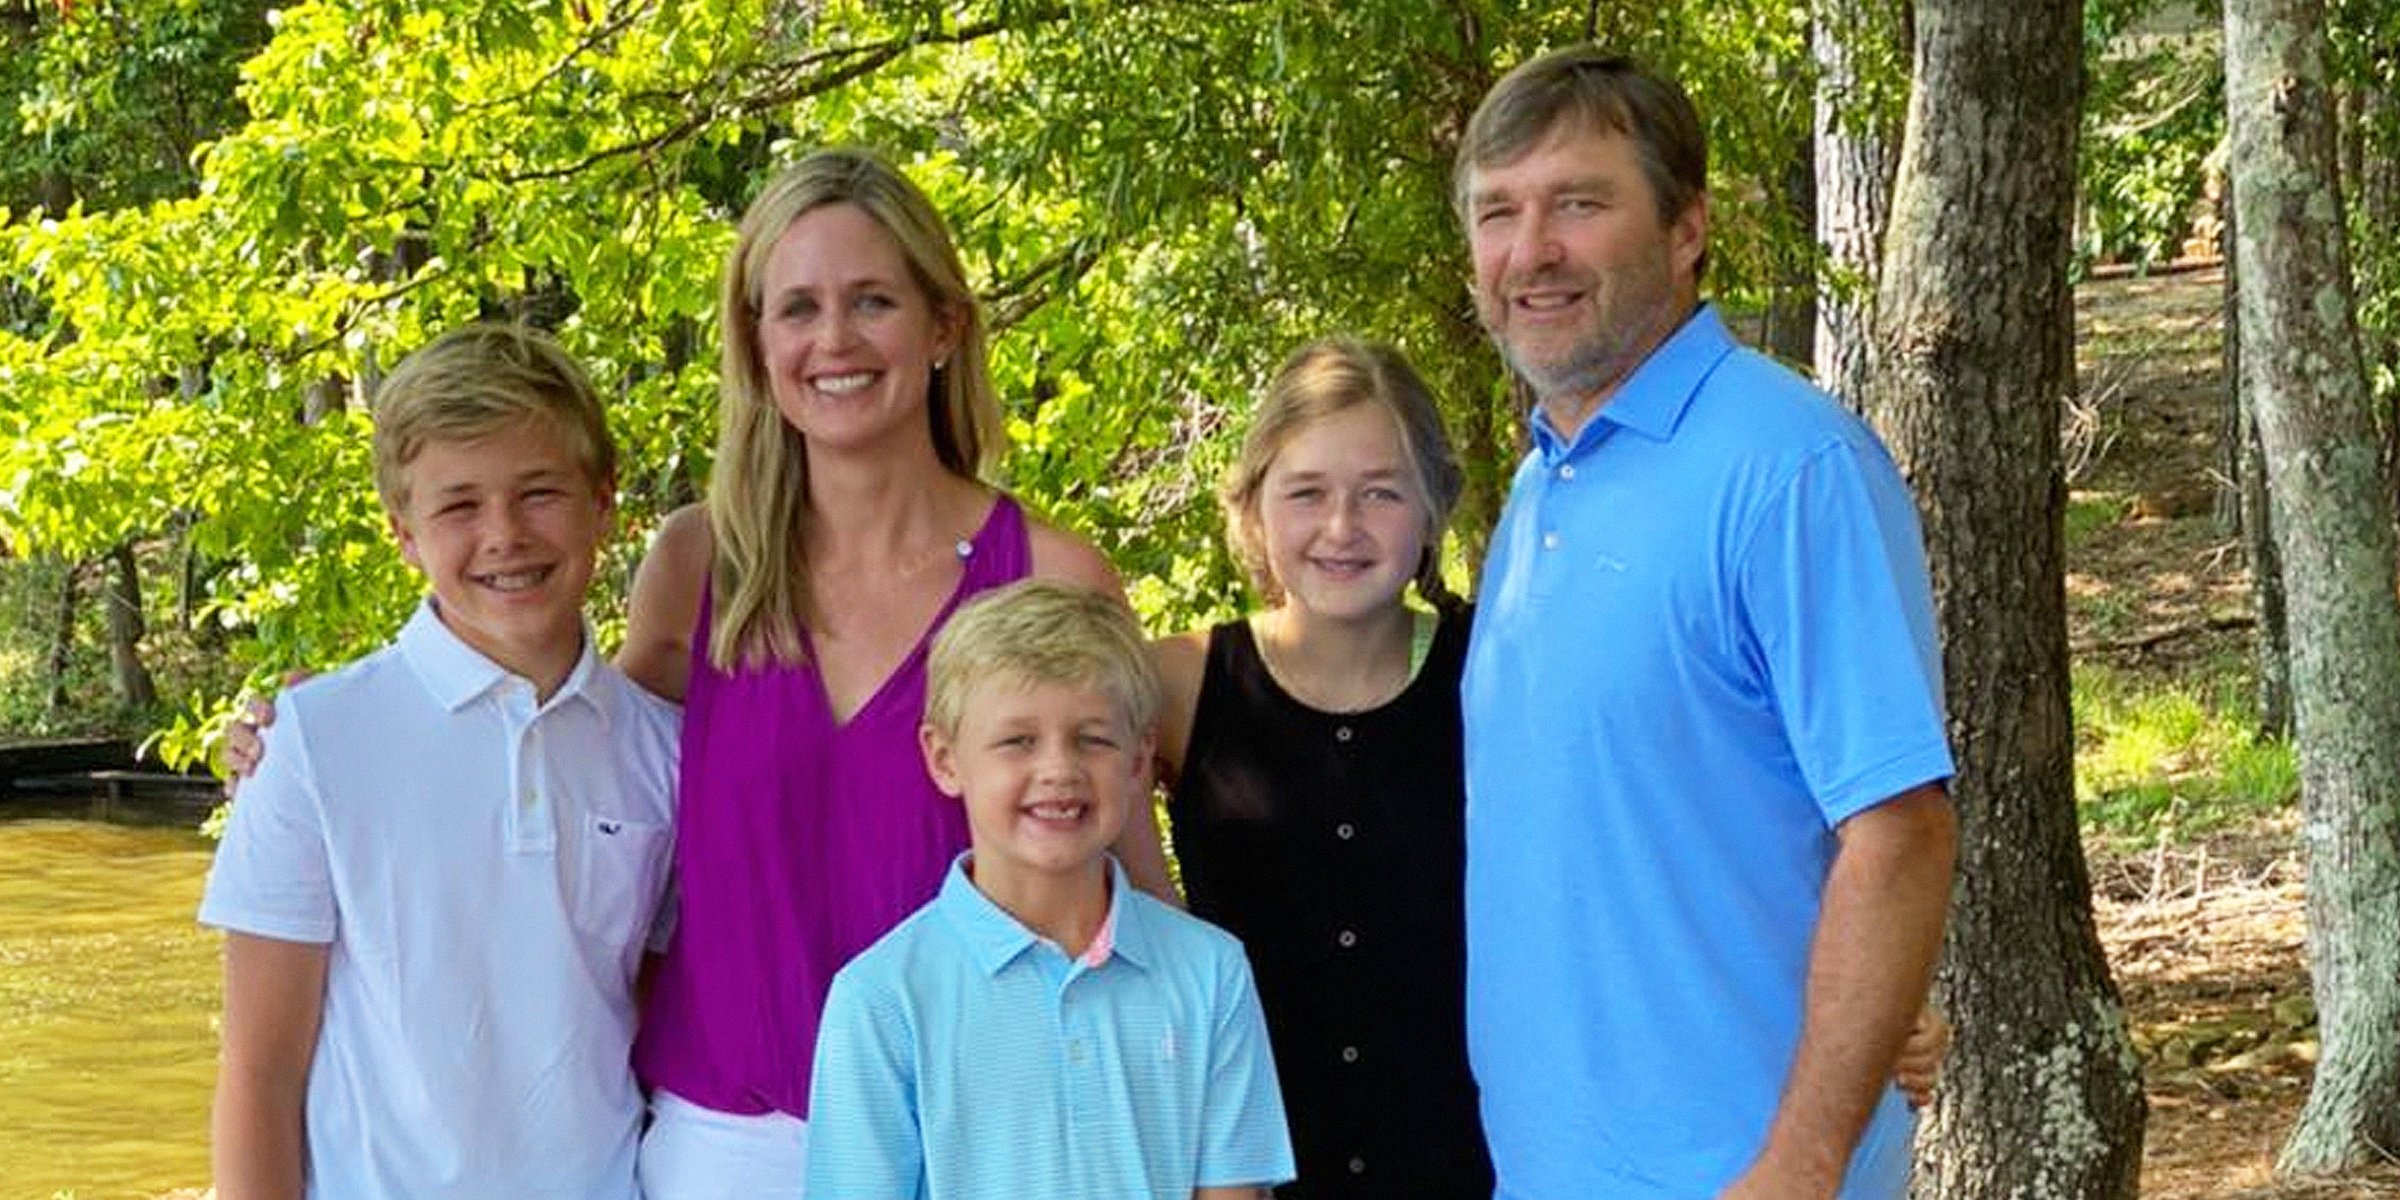 Mary Beth Lycett, Kirby Smart and Their Children | Source: facebook.com/Mary Beth Smart 